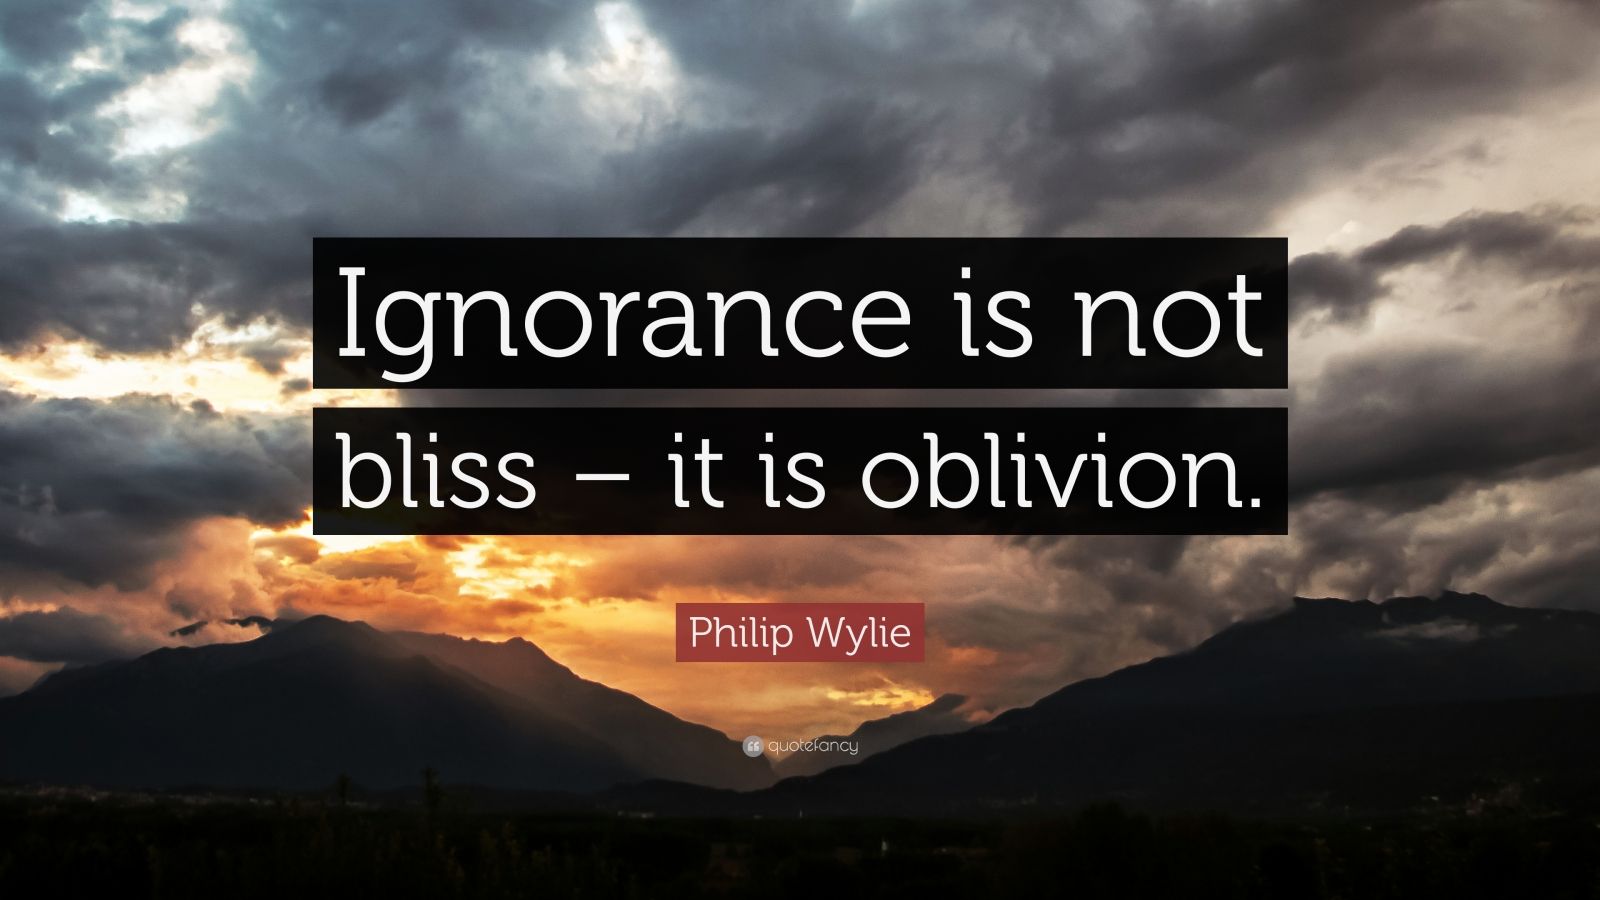 Philip Wylie Quote: “Ignorance is not bliss – it is oblivion.” (9 ...